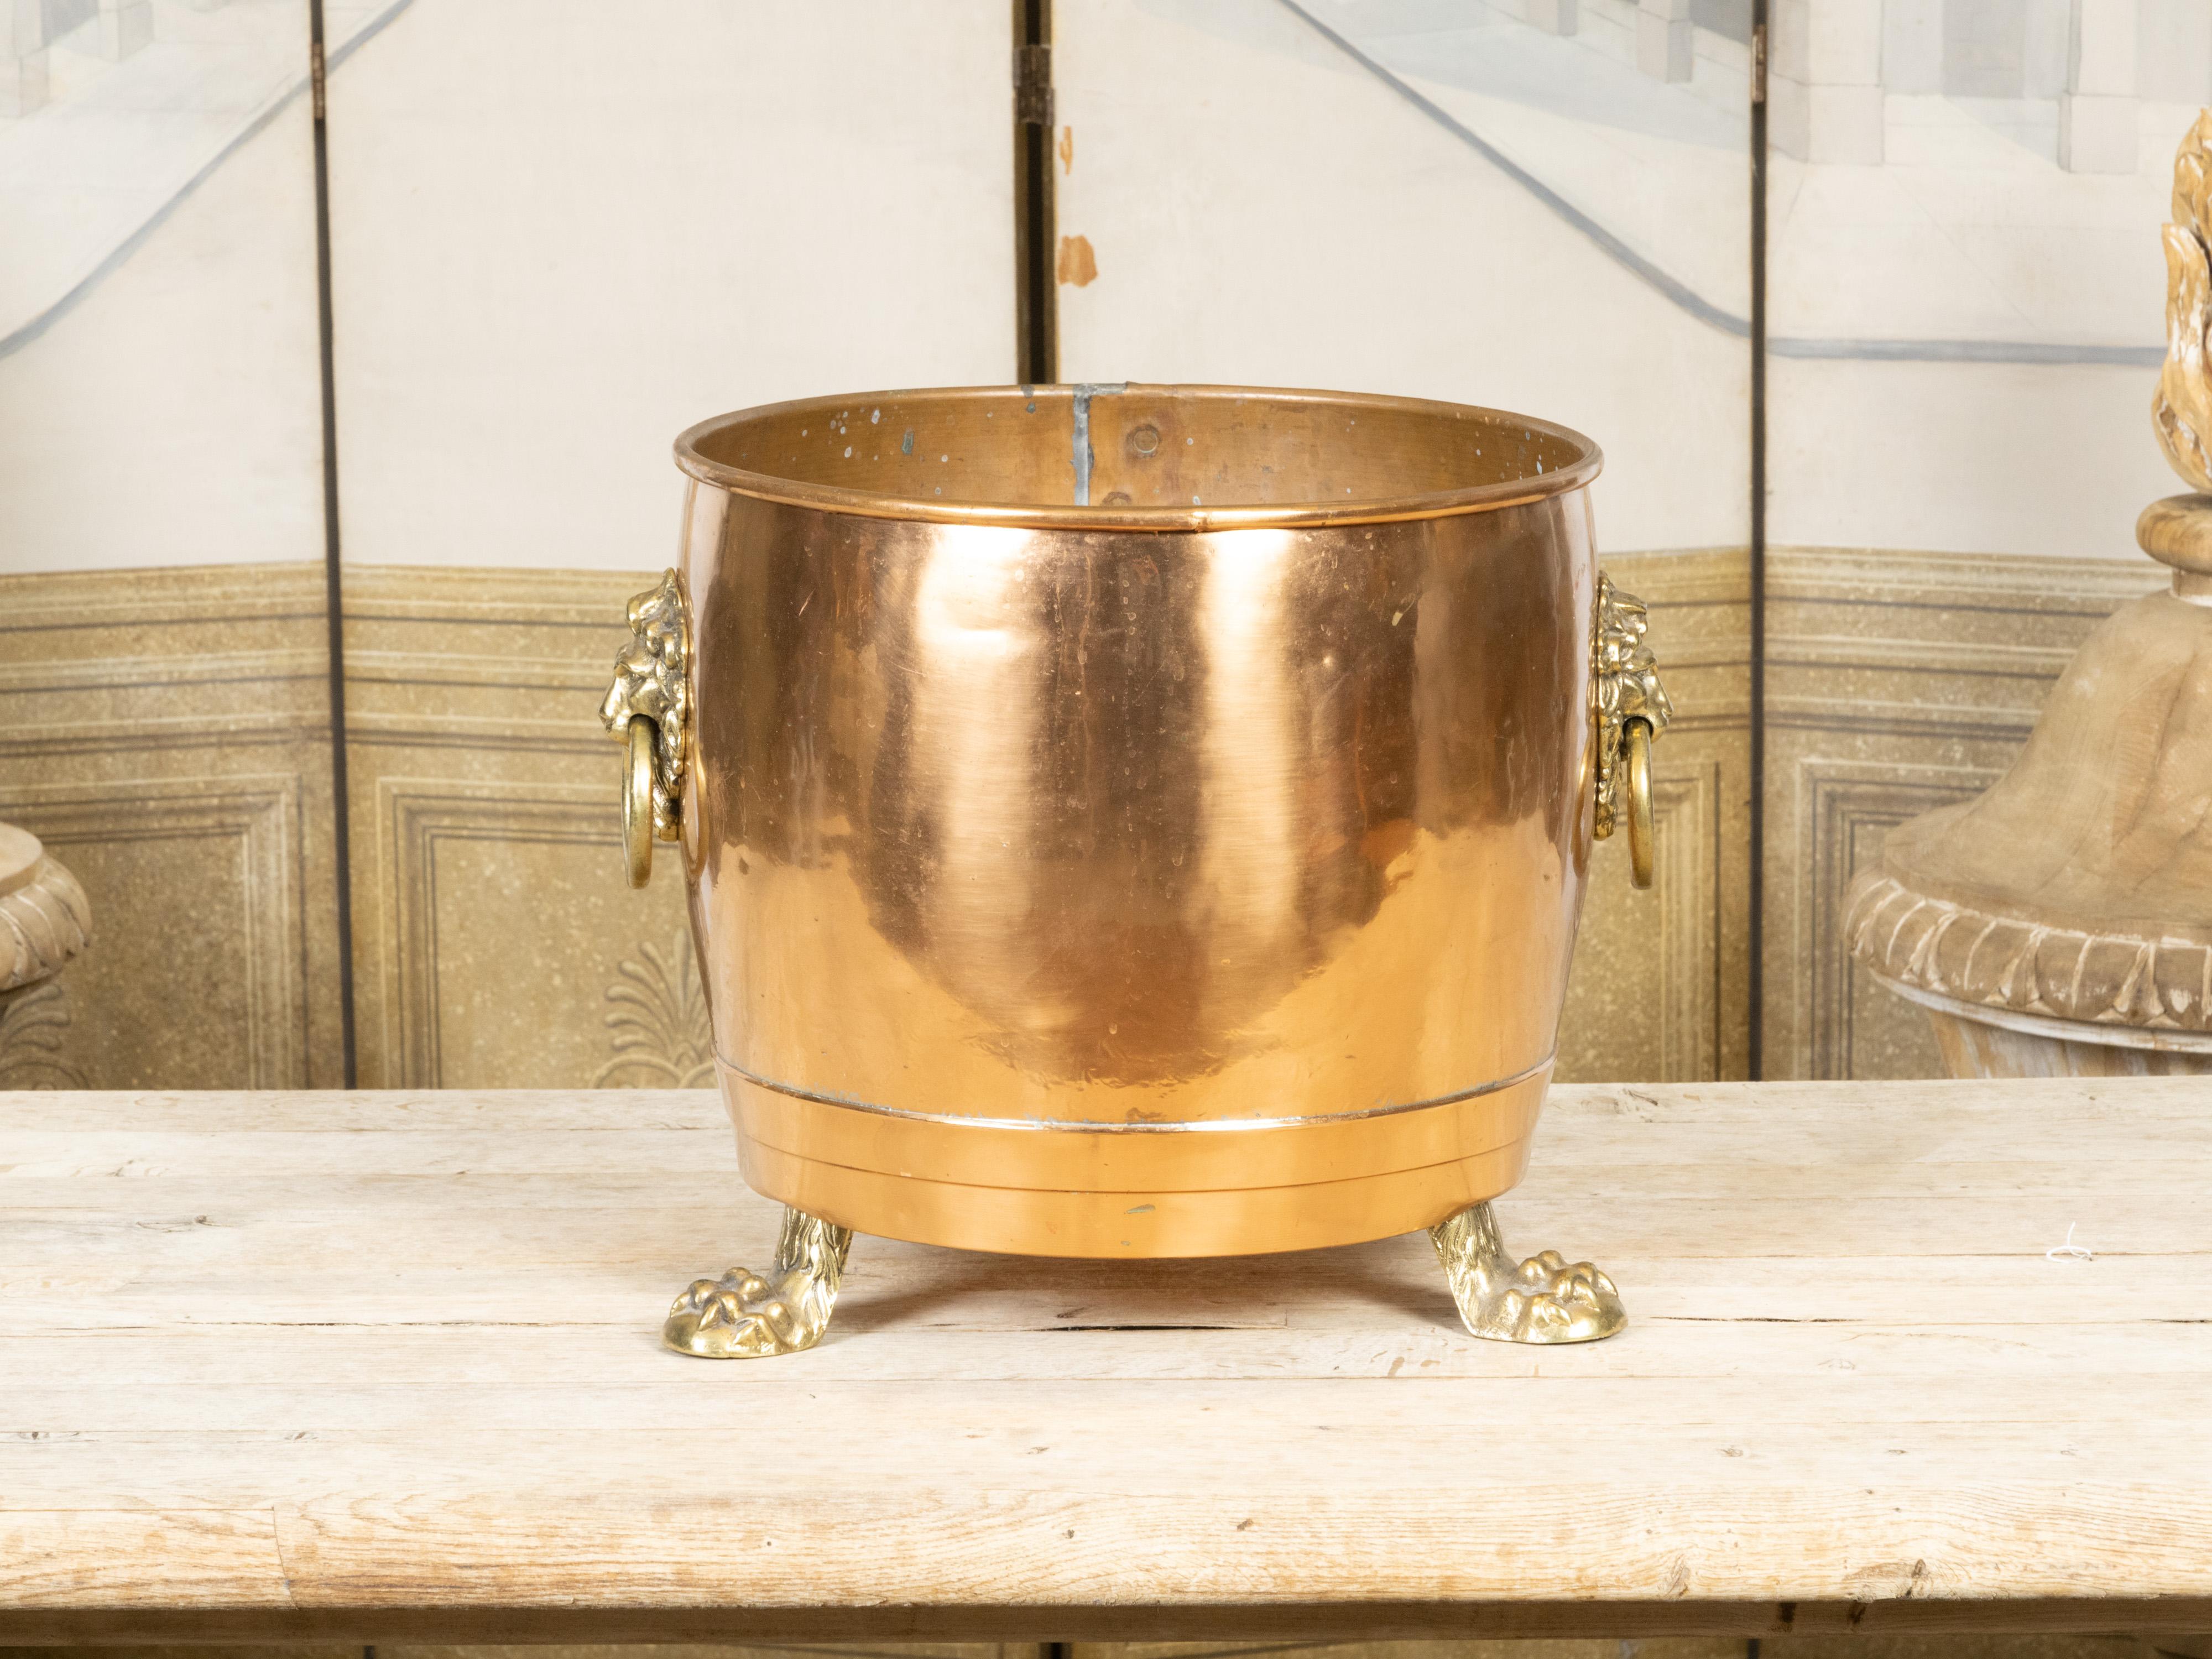 An English copper and brass cache pot planter from the early 20th century, with lion paw feet and lateral lion head handles. Created in England at the Turn of the Century which saw the transition between the 19th to the 20th, this round copper